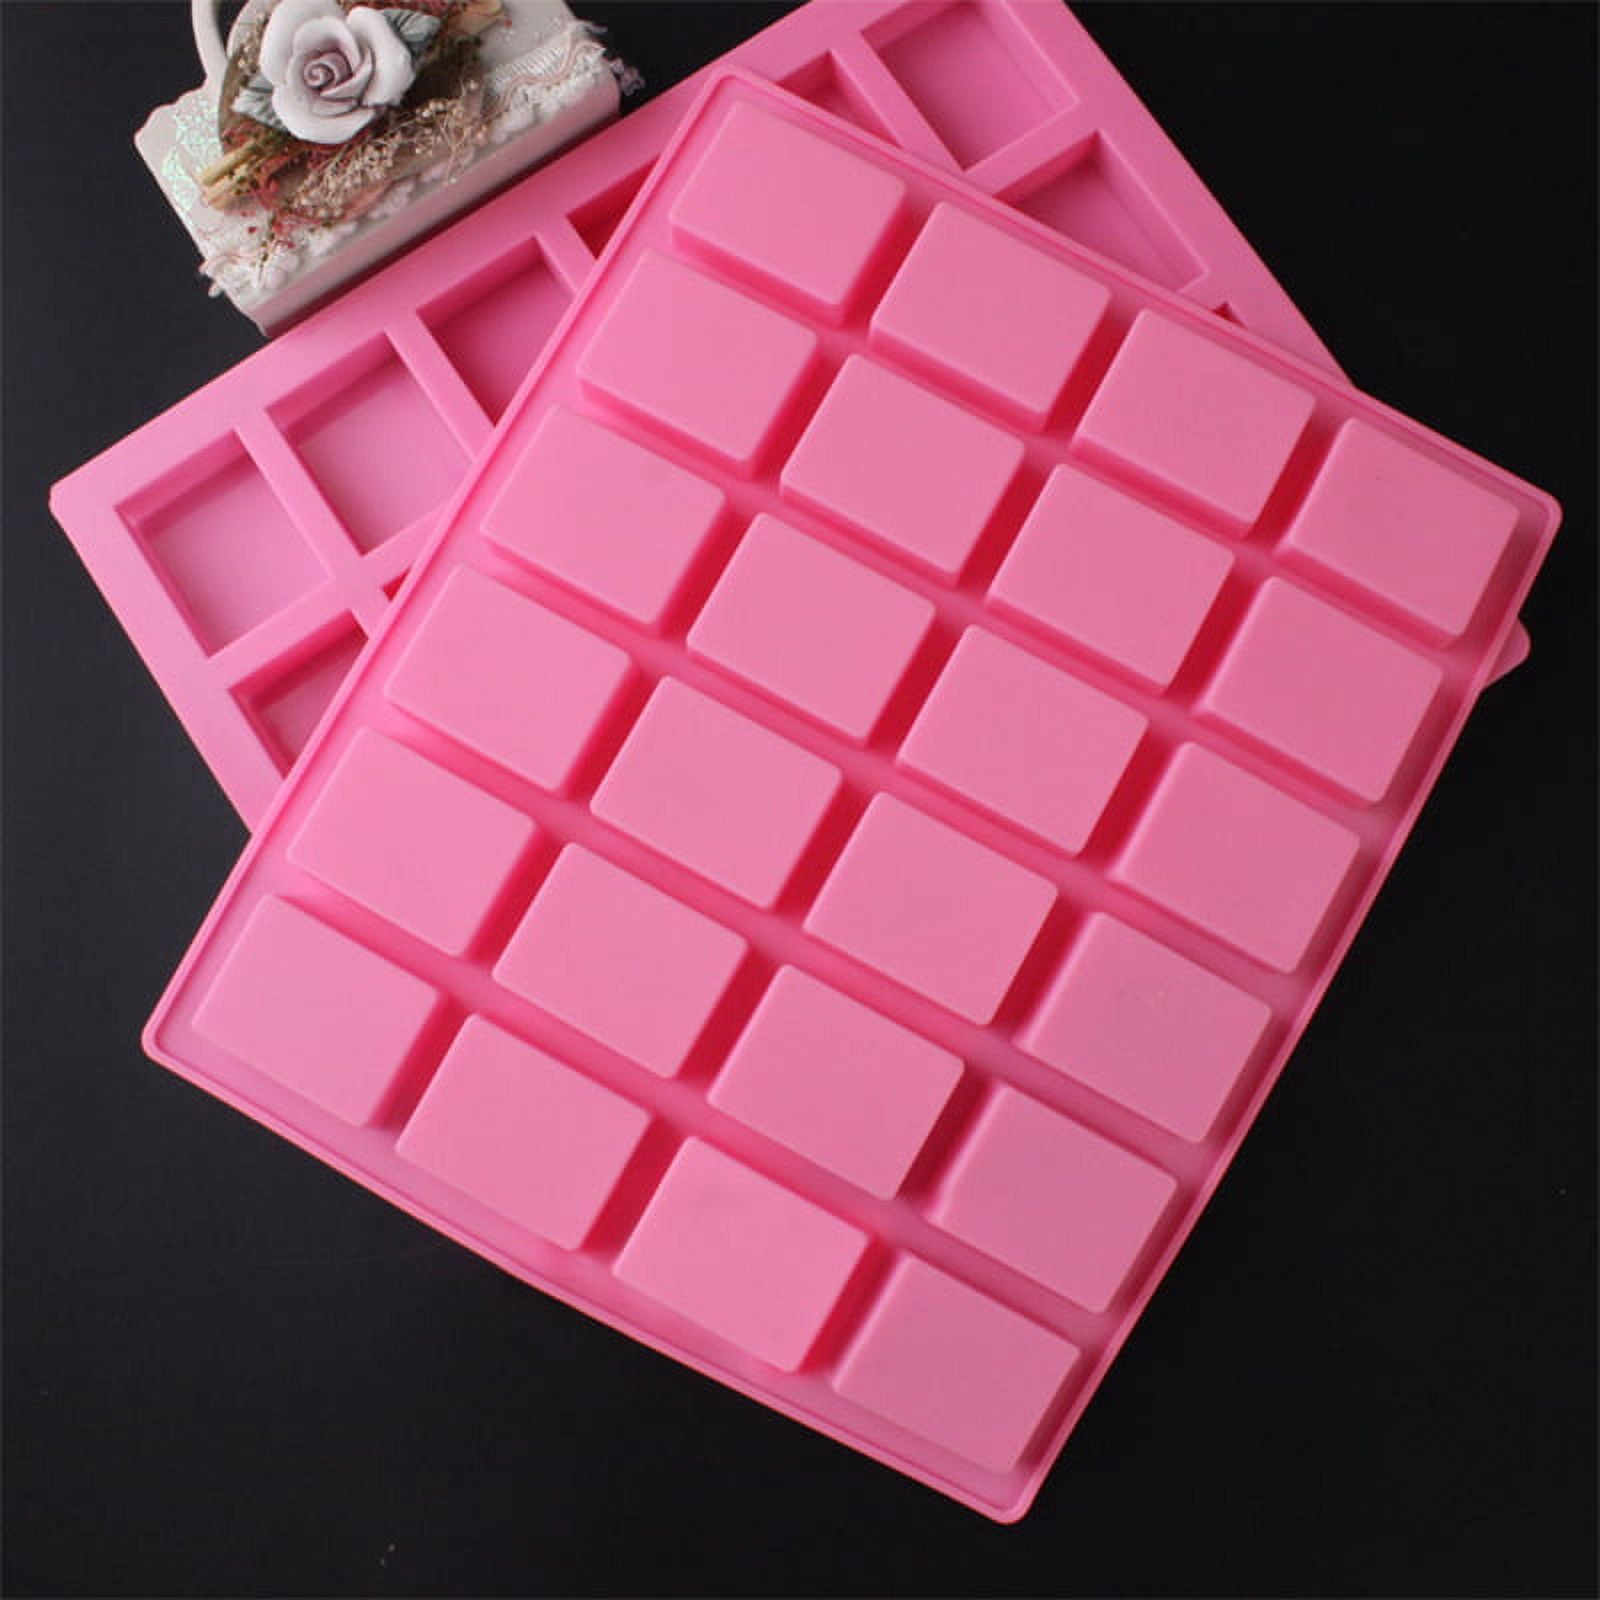 Square Silicone Mold - 24 Cavity - Lone Star Candle Supply